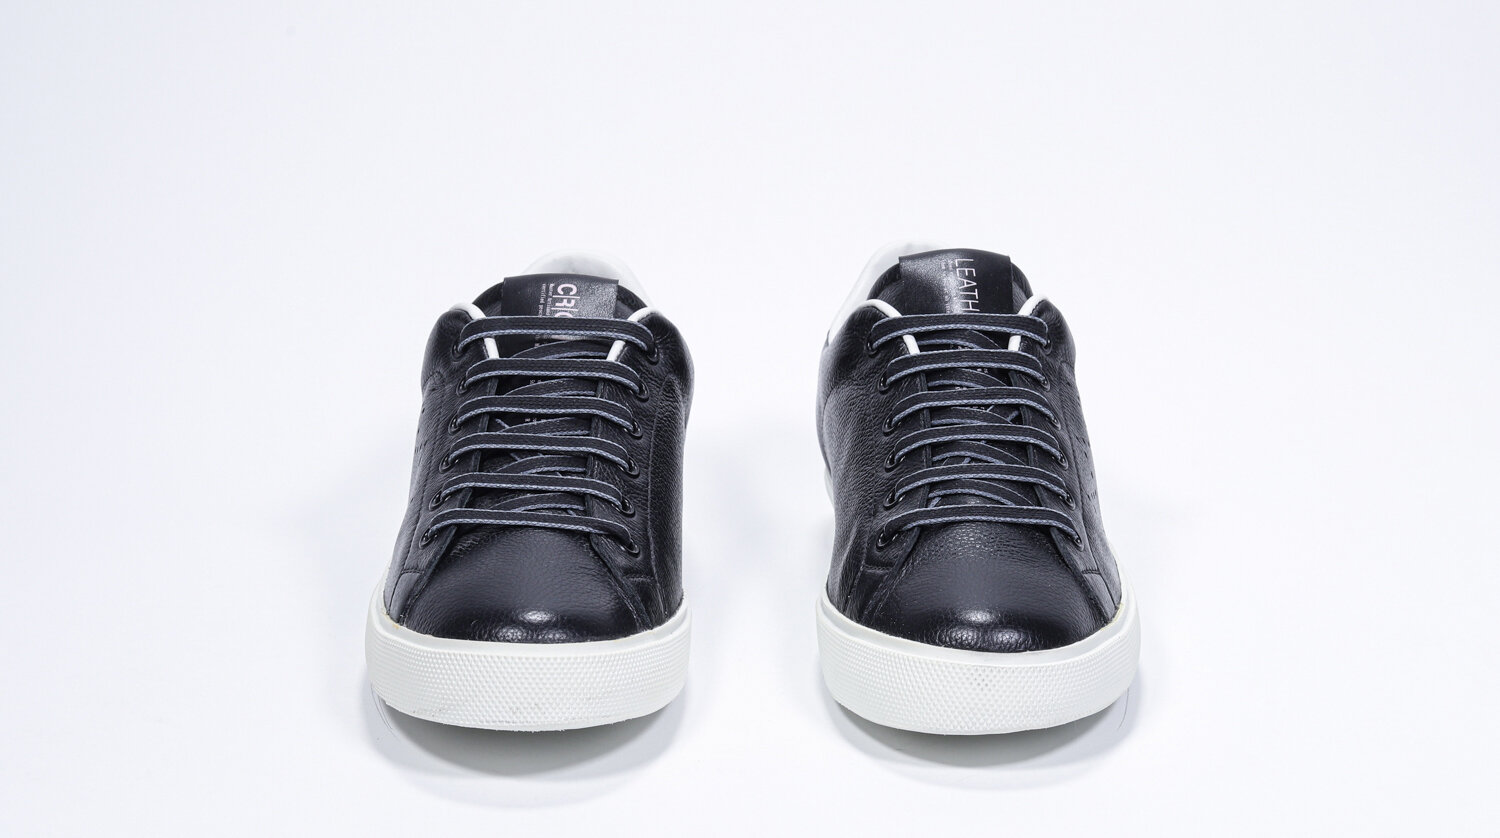 Luxury sneakers by Leather CROWN